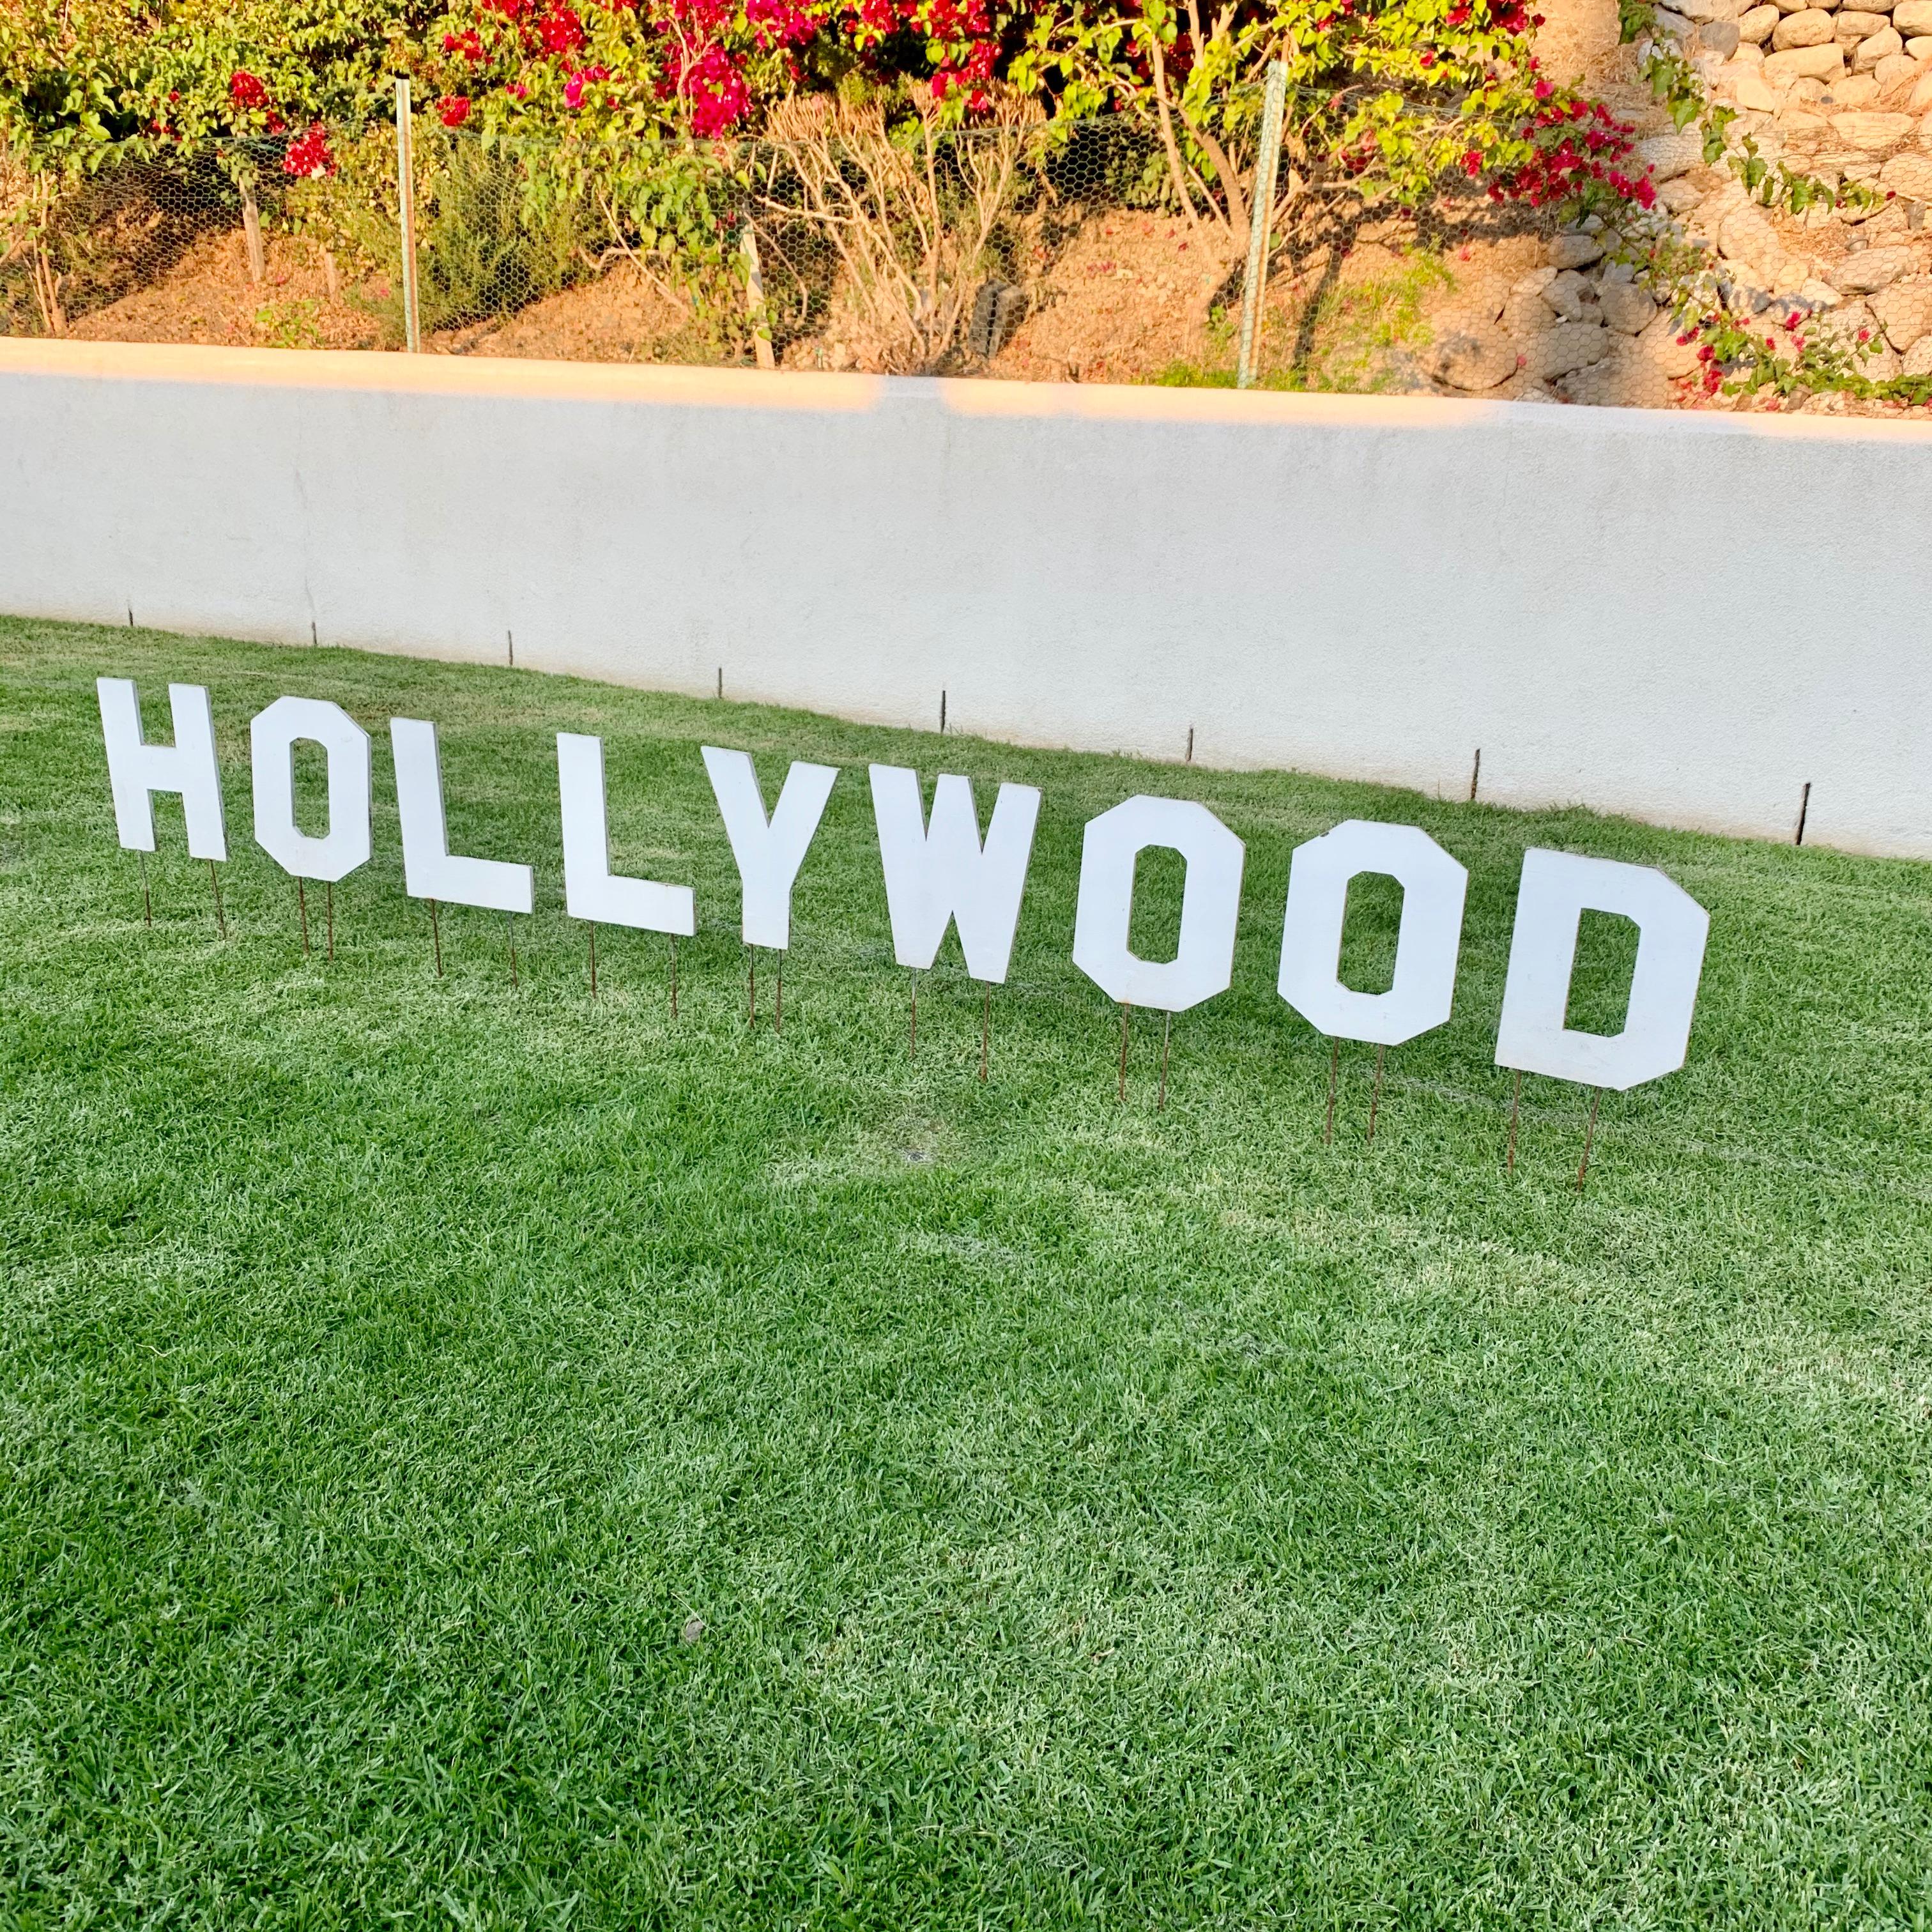 Hollywood Sign Artist Model In Good Condition For Sale In Los Angeles, CA